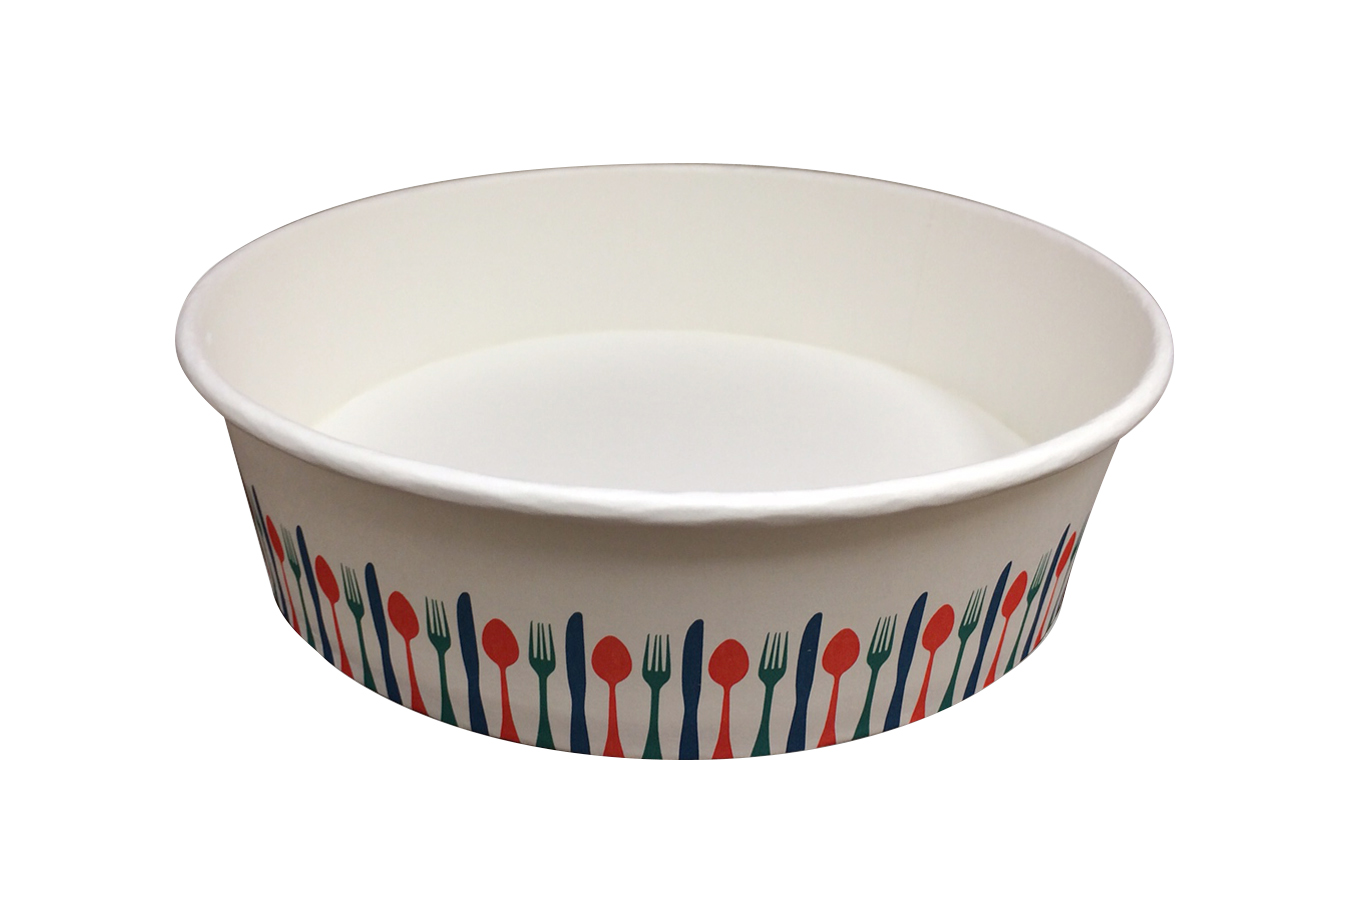 Stock print spoon fork knif color takeout container 48 oz size Athena paper bowl by Ecoapx Inc